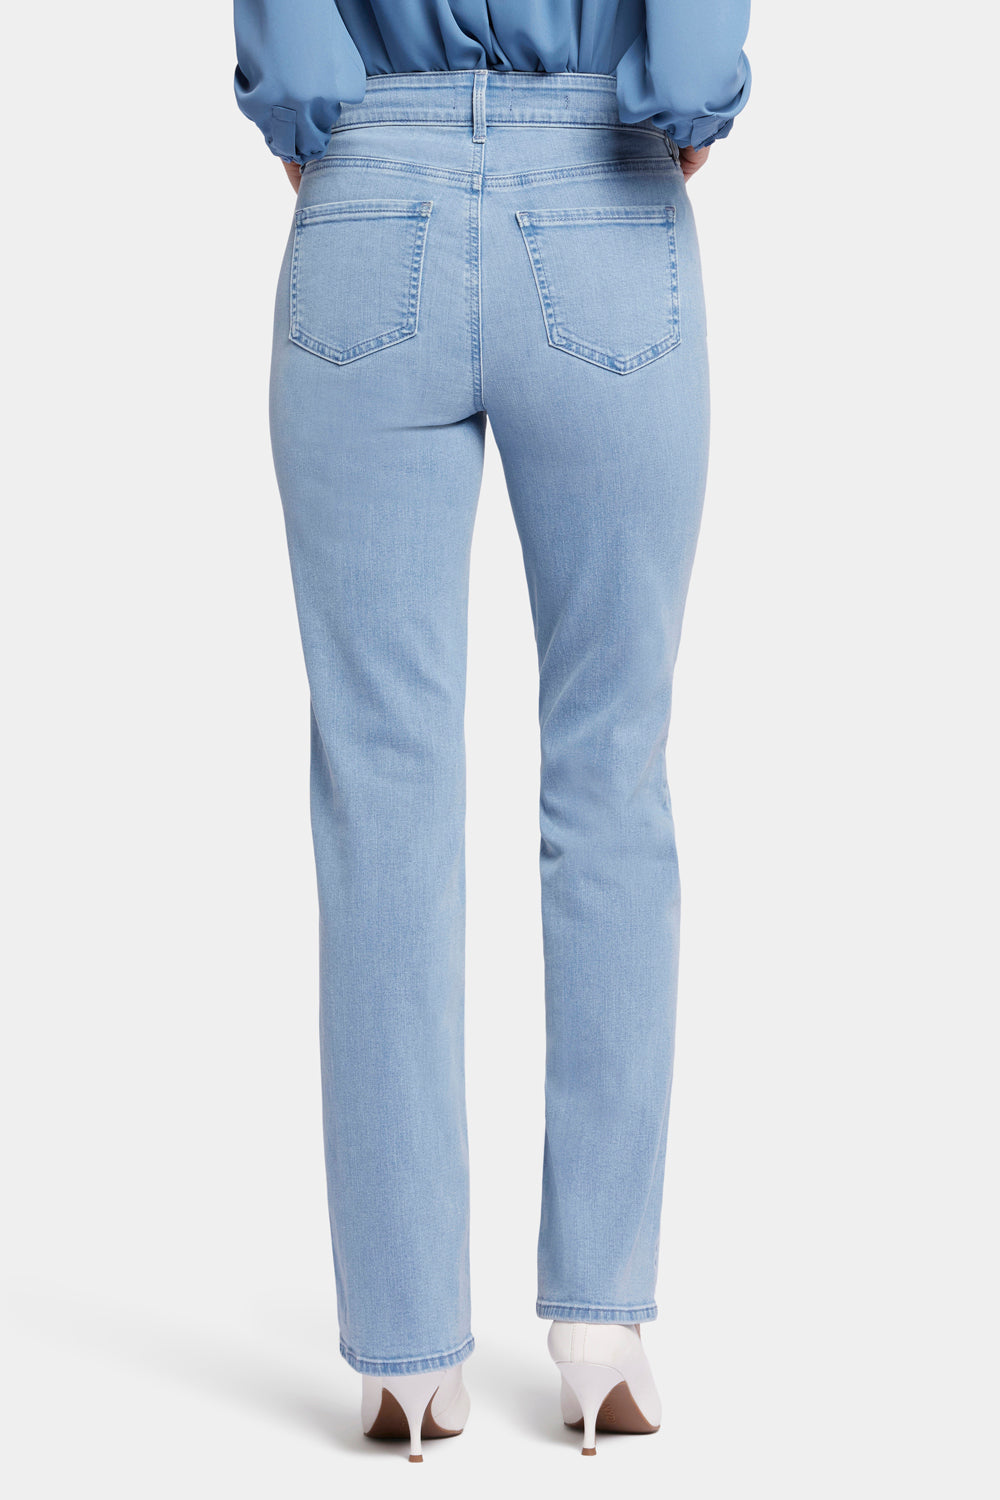 Marilyn Straight Jeans With High Rise And 31 Inseam - Kingston